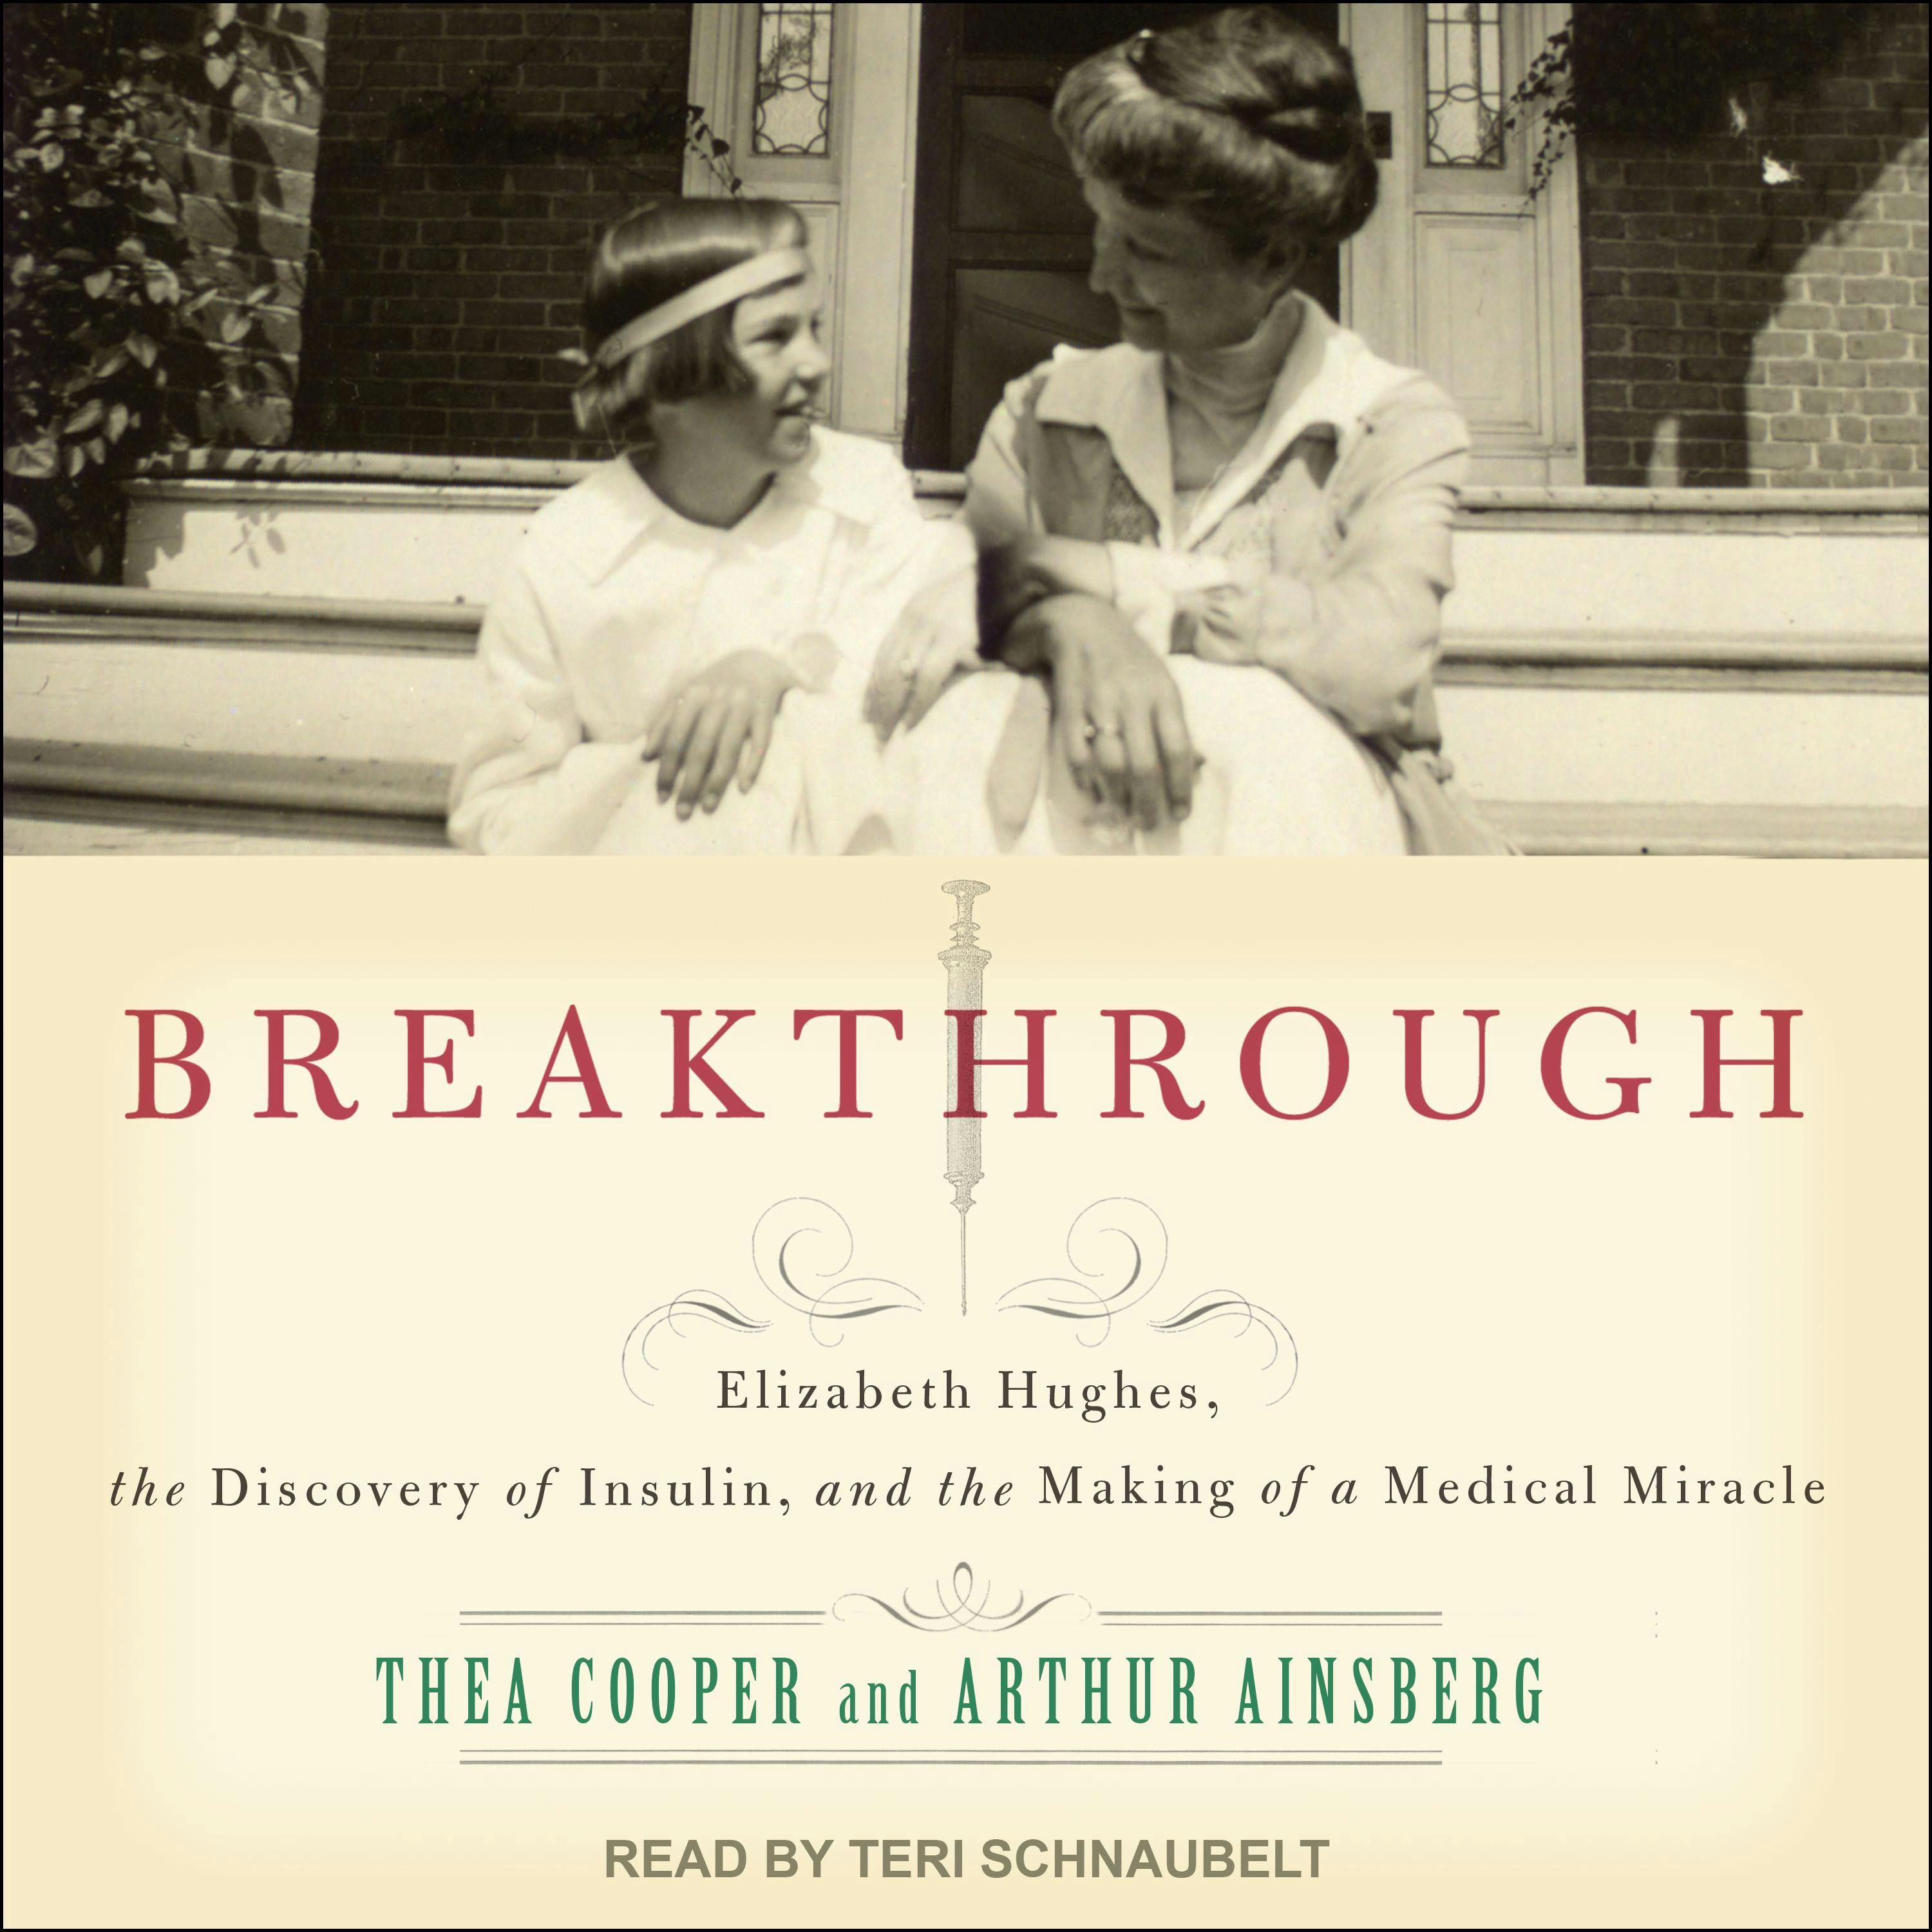 Breakthrough: Elizabeth Hughes, the Discovery of Insulin, and the Making of a Medical Miracle - Thea Cooper, Arthur Ainsberg